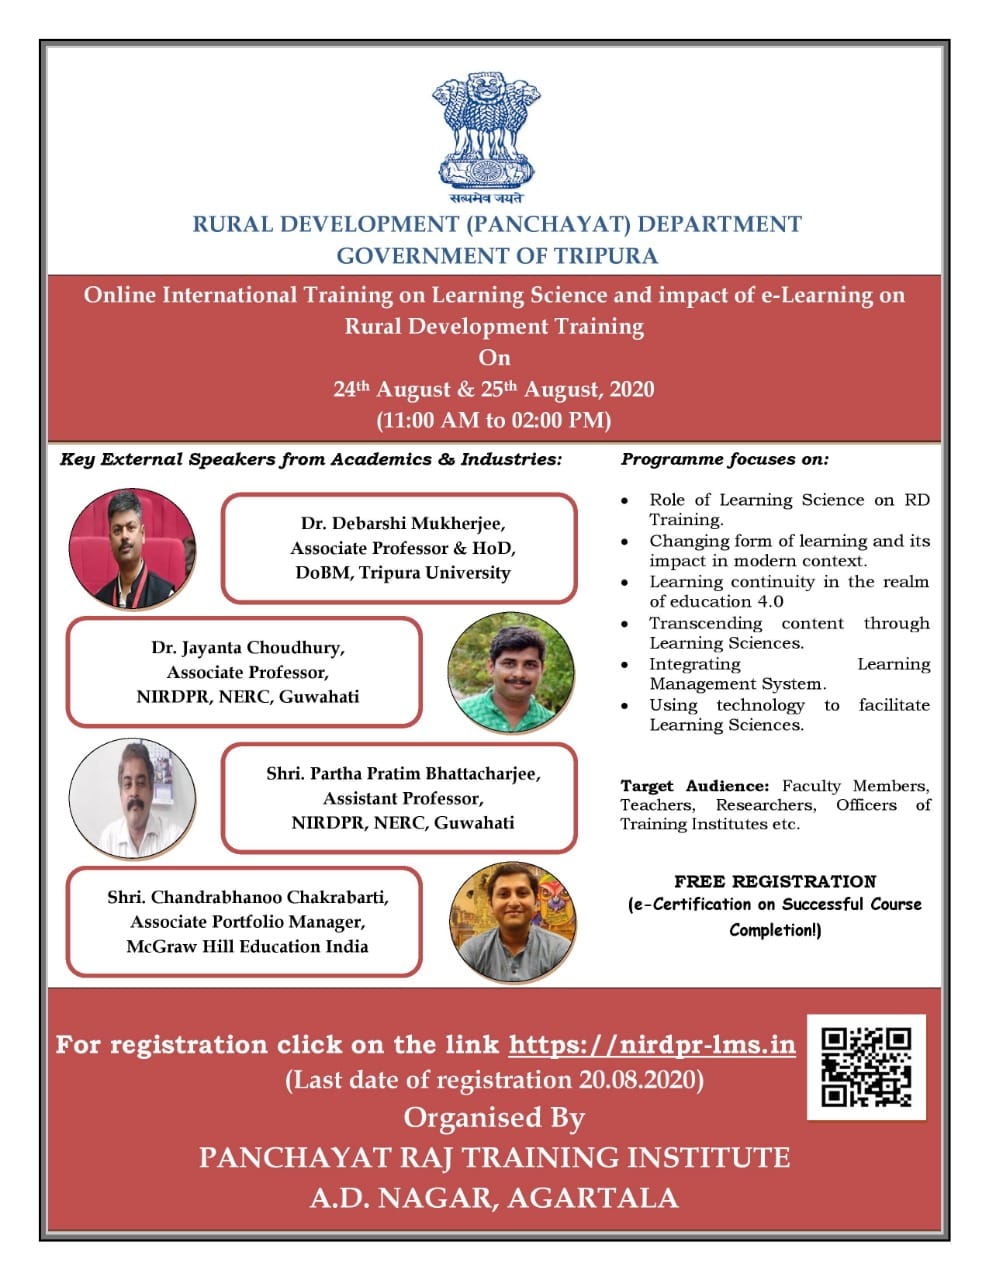 Online International Training on Learning Science and impact of e-learning on Rural Development Training.